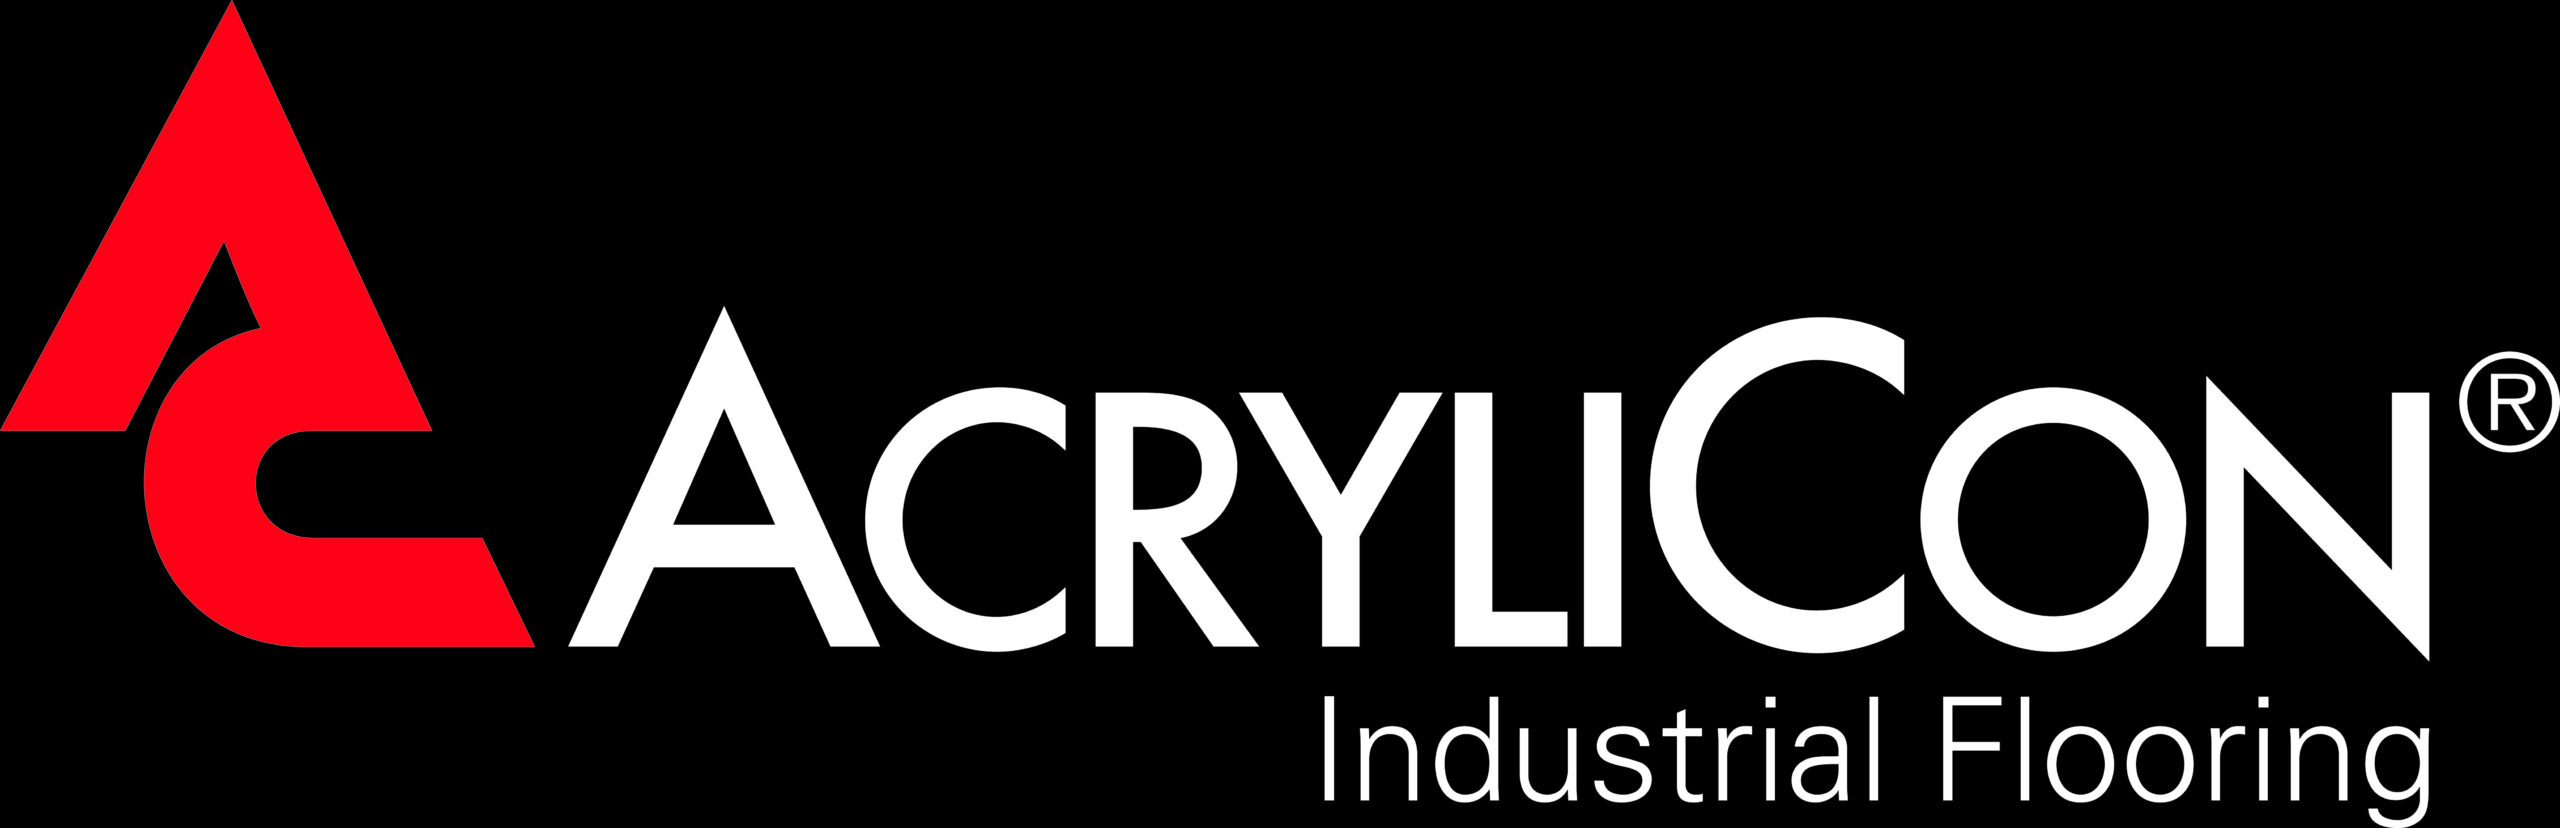 Acylicon_Brand_For_Black